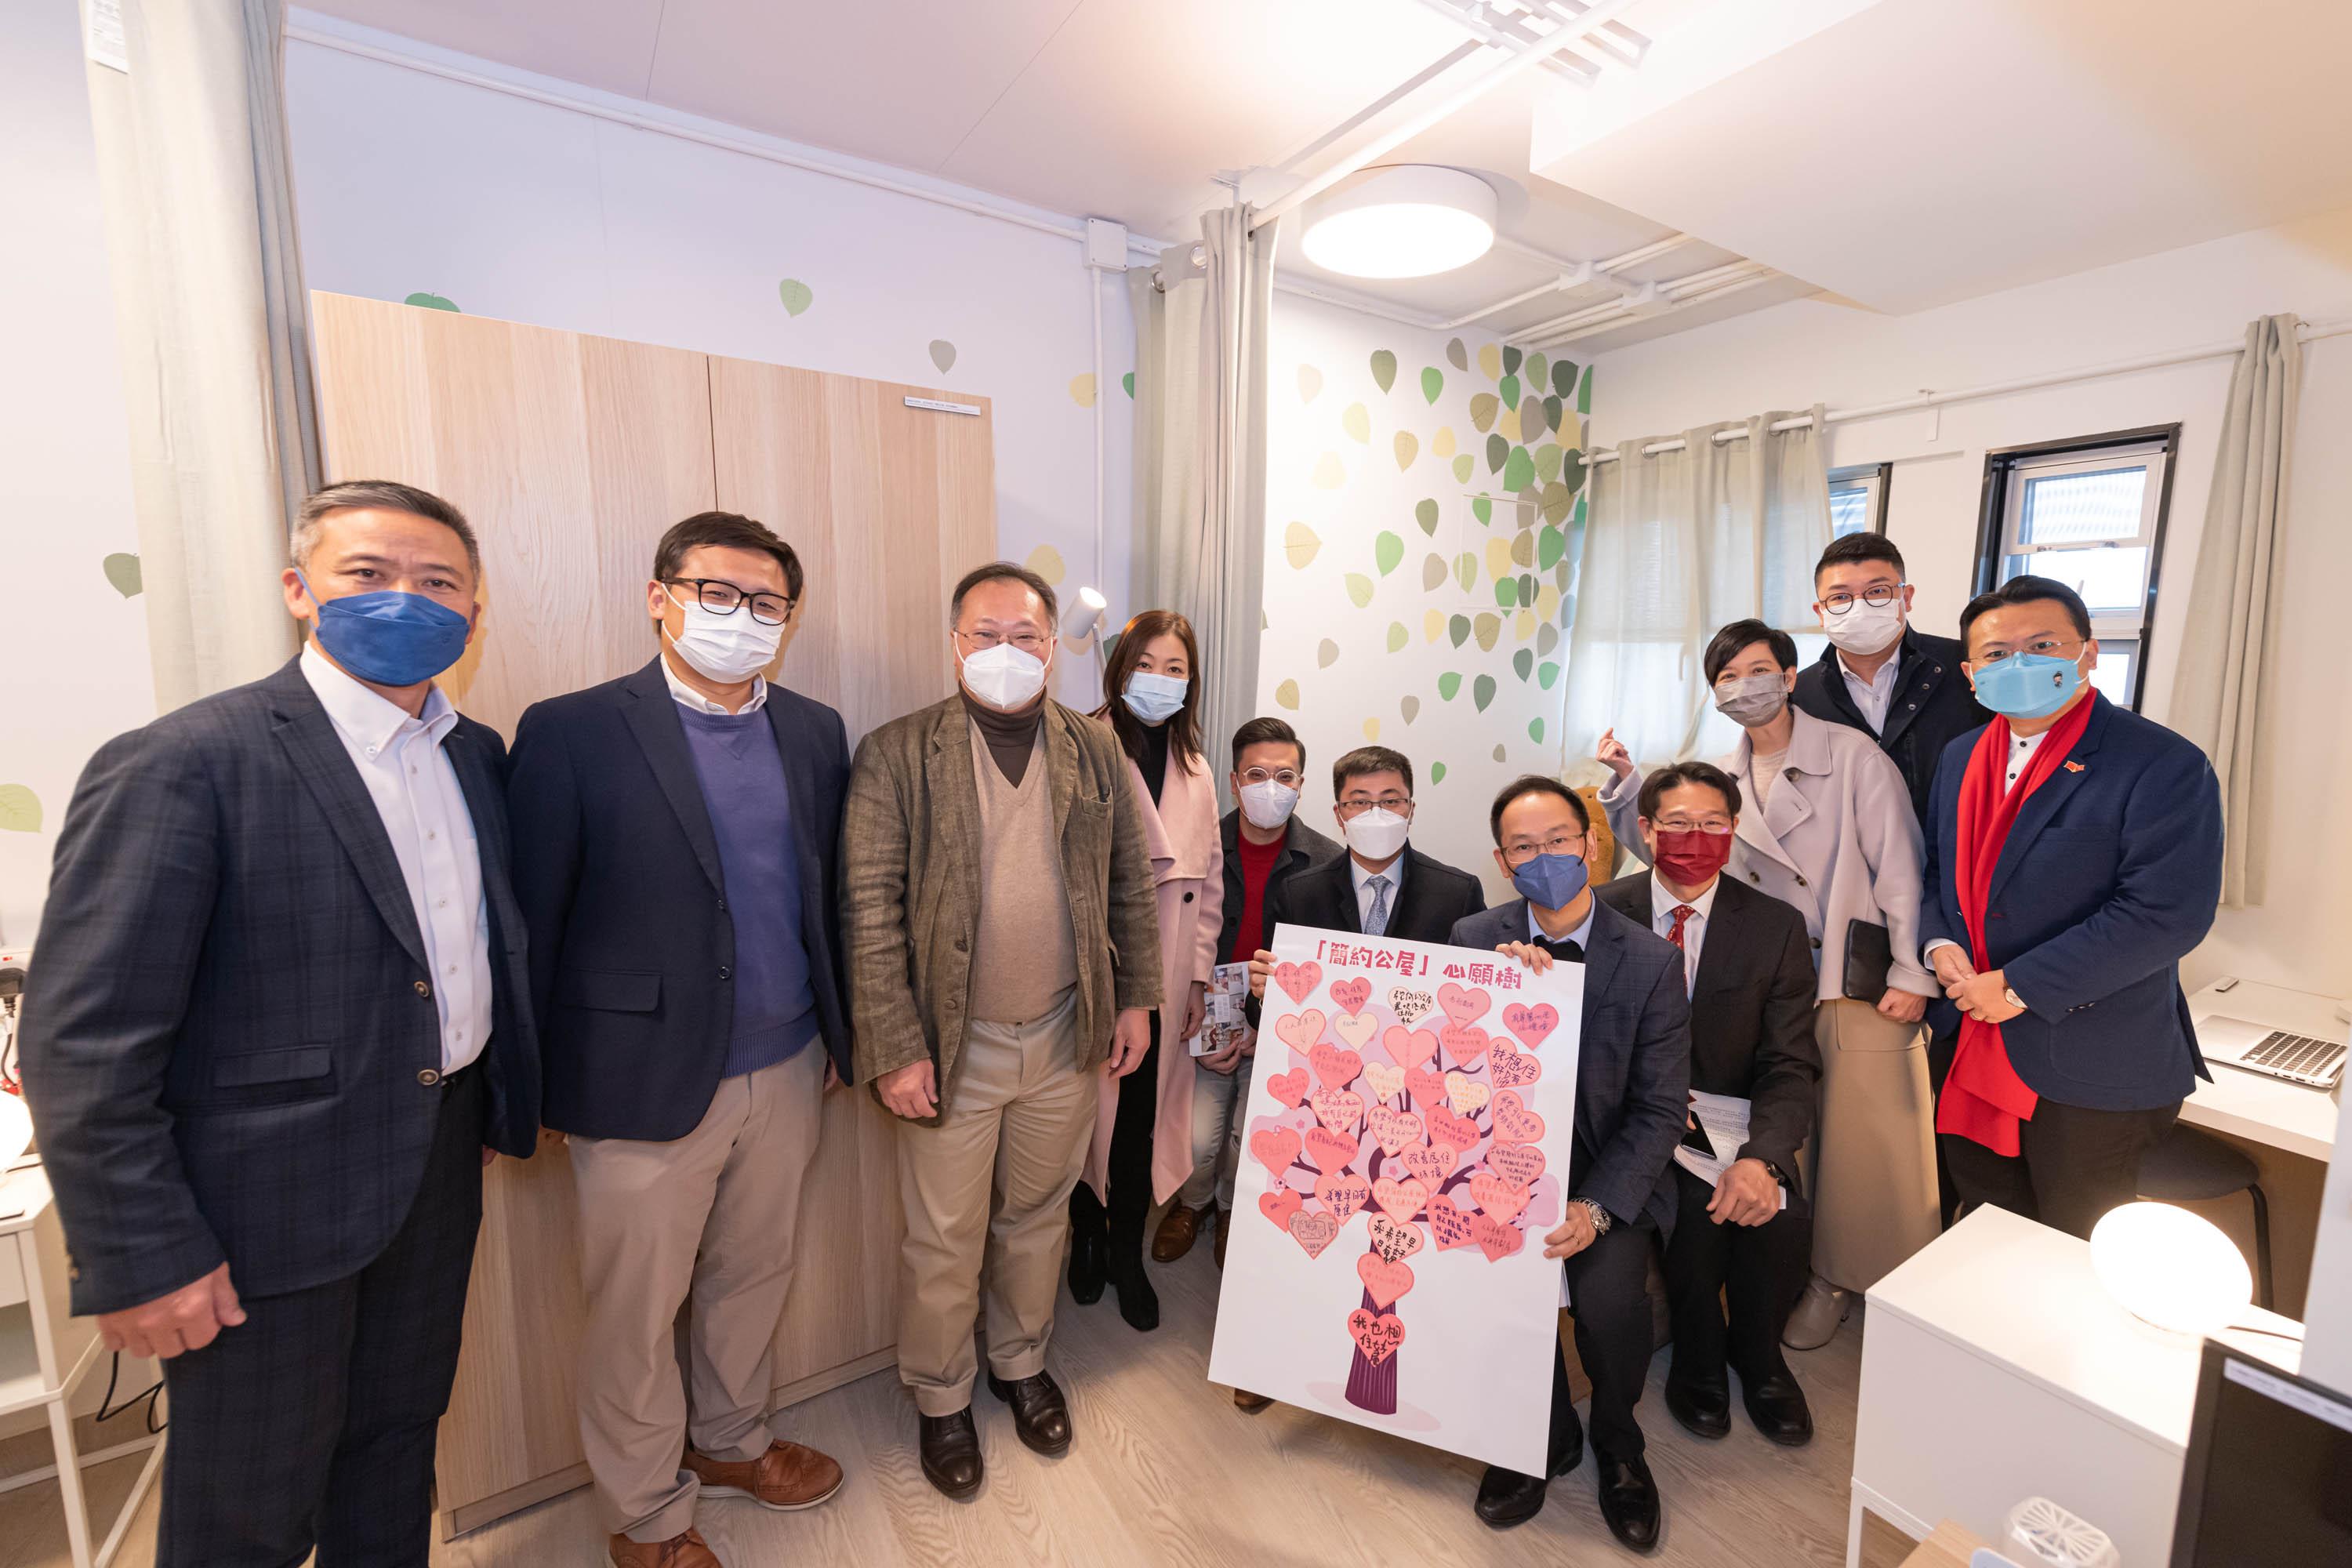 The Legislative Council (LegCo) Public Works Subcommittee visited a Light Public Housing mock-up unit today (January 30). Photo shows LegCo Members and the Secretary for Housing, Ms Winnie Ho (third right), in a group photo.
